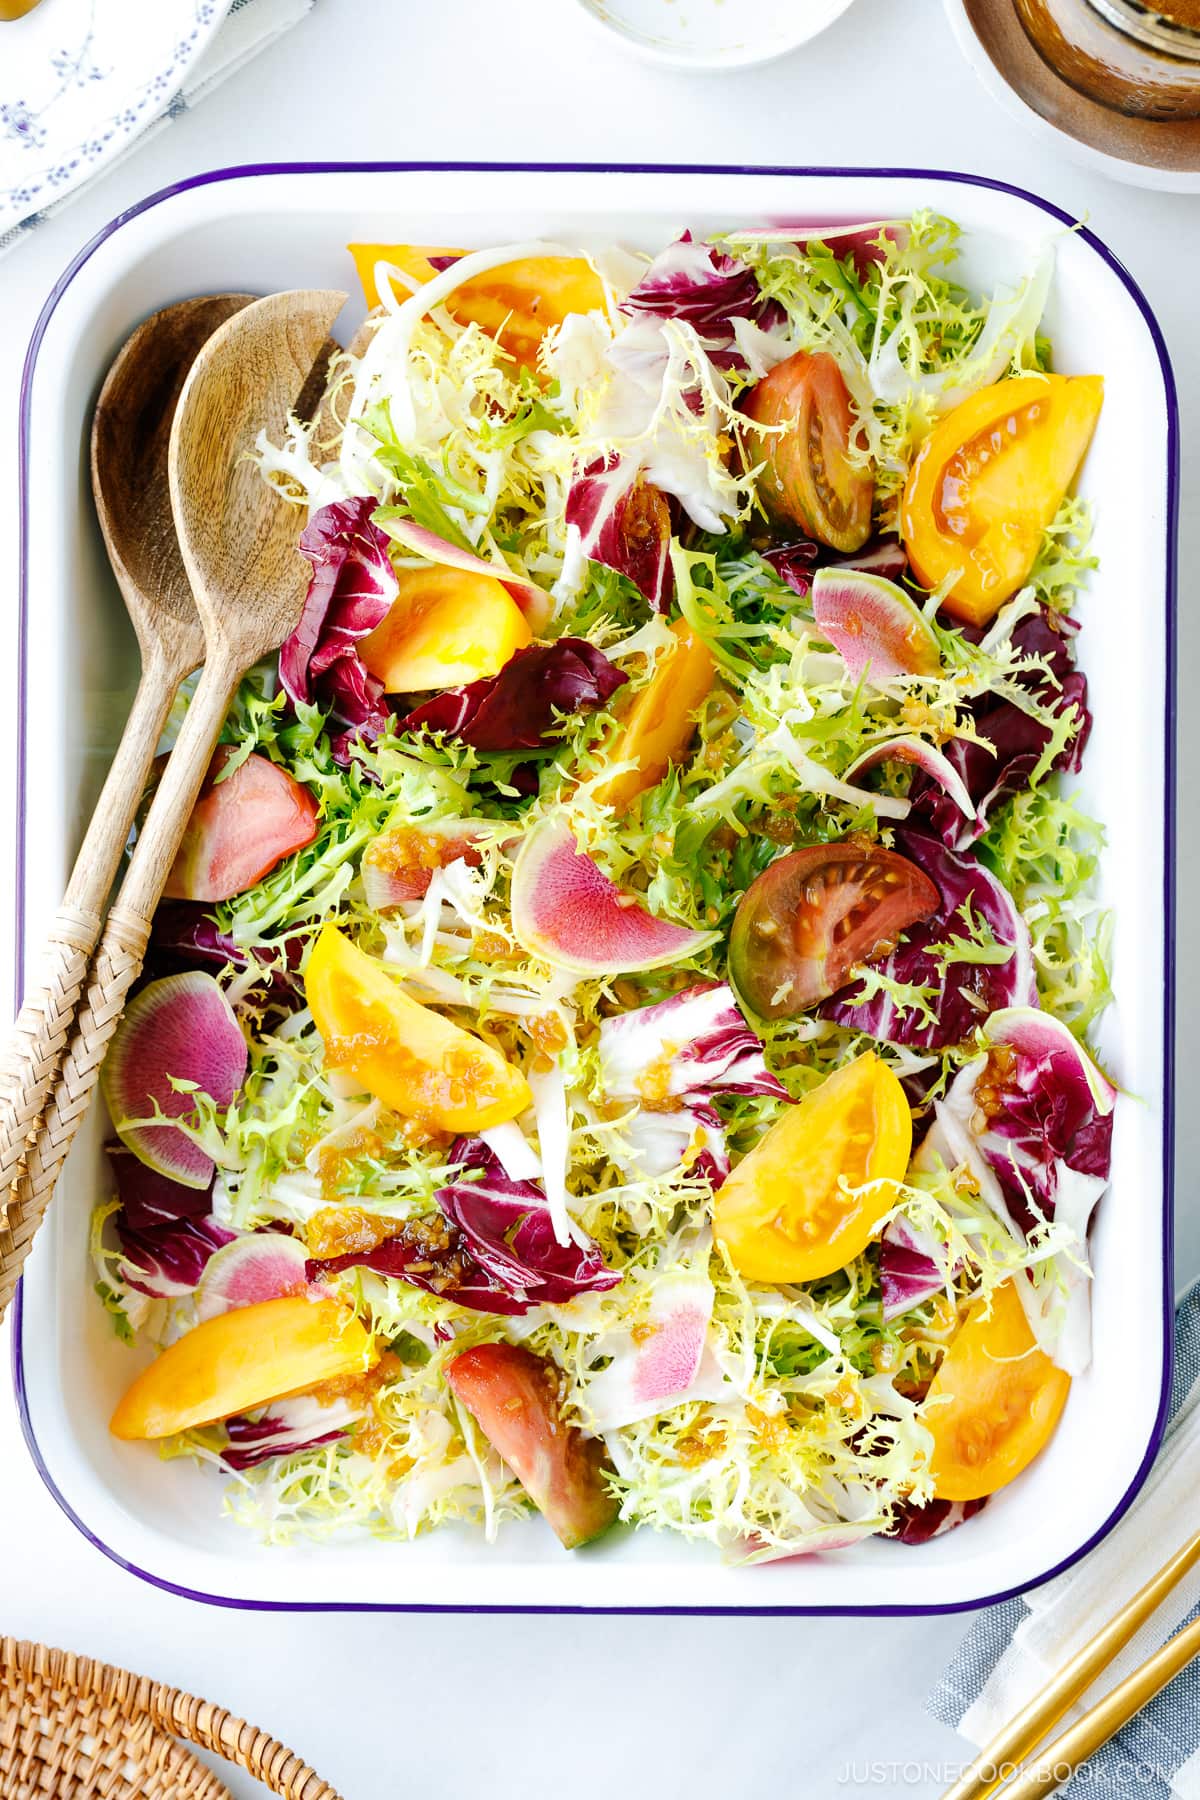 A white and blue enamel tray containing frisee and radicchio lettuce, thinly sliced watermelon radish, and heirloom tomatoes, drizzled with Japanese onion dressing.